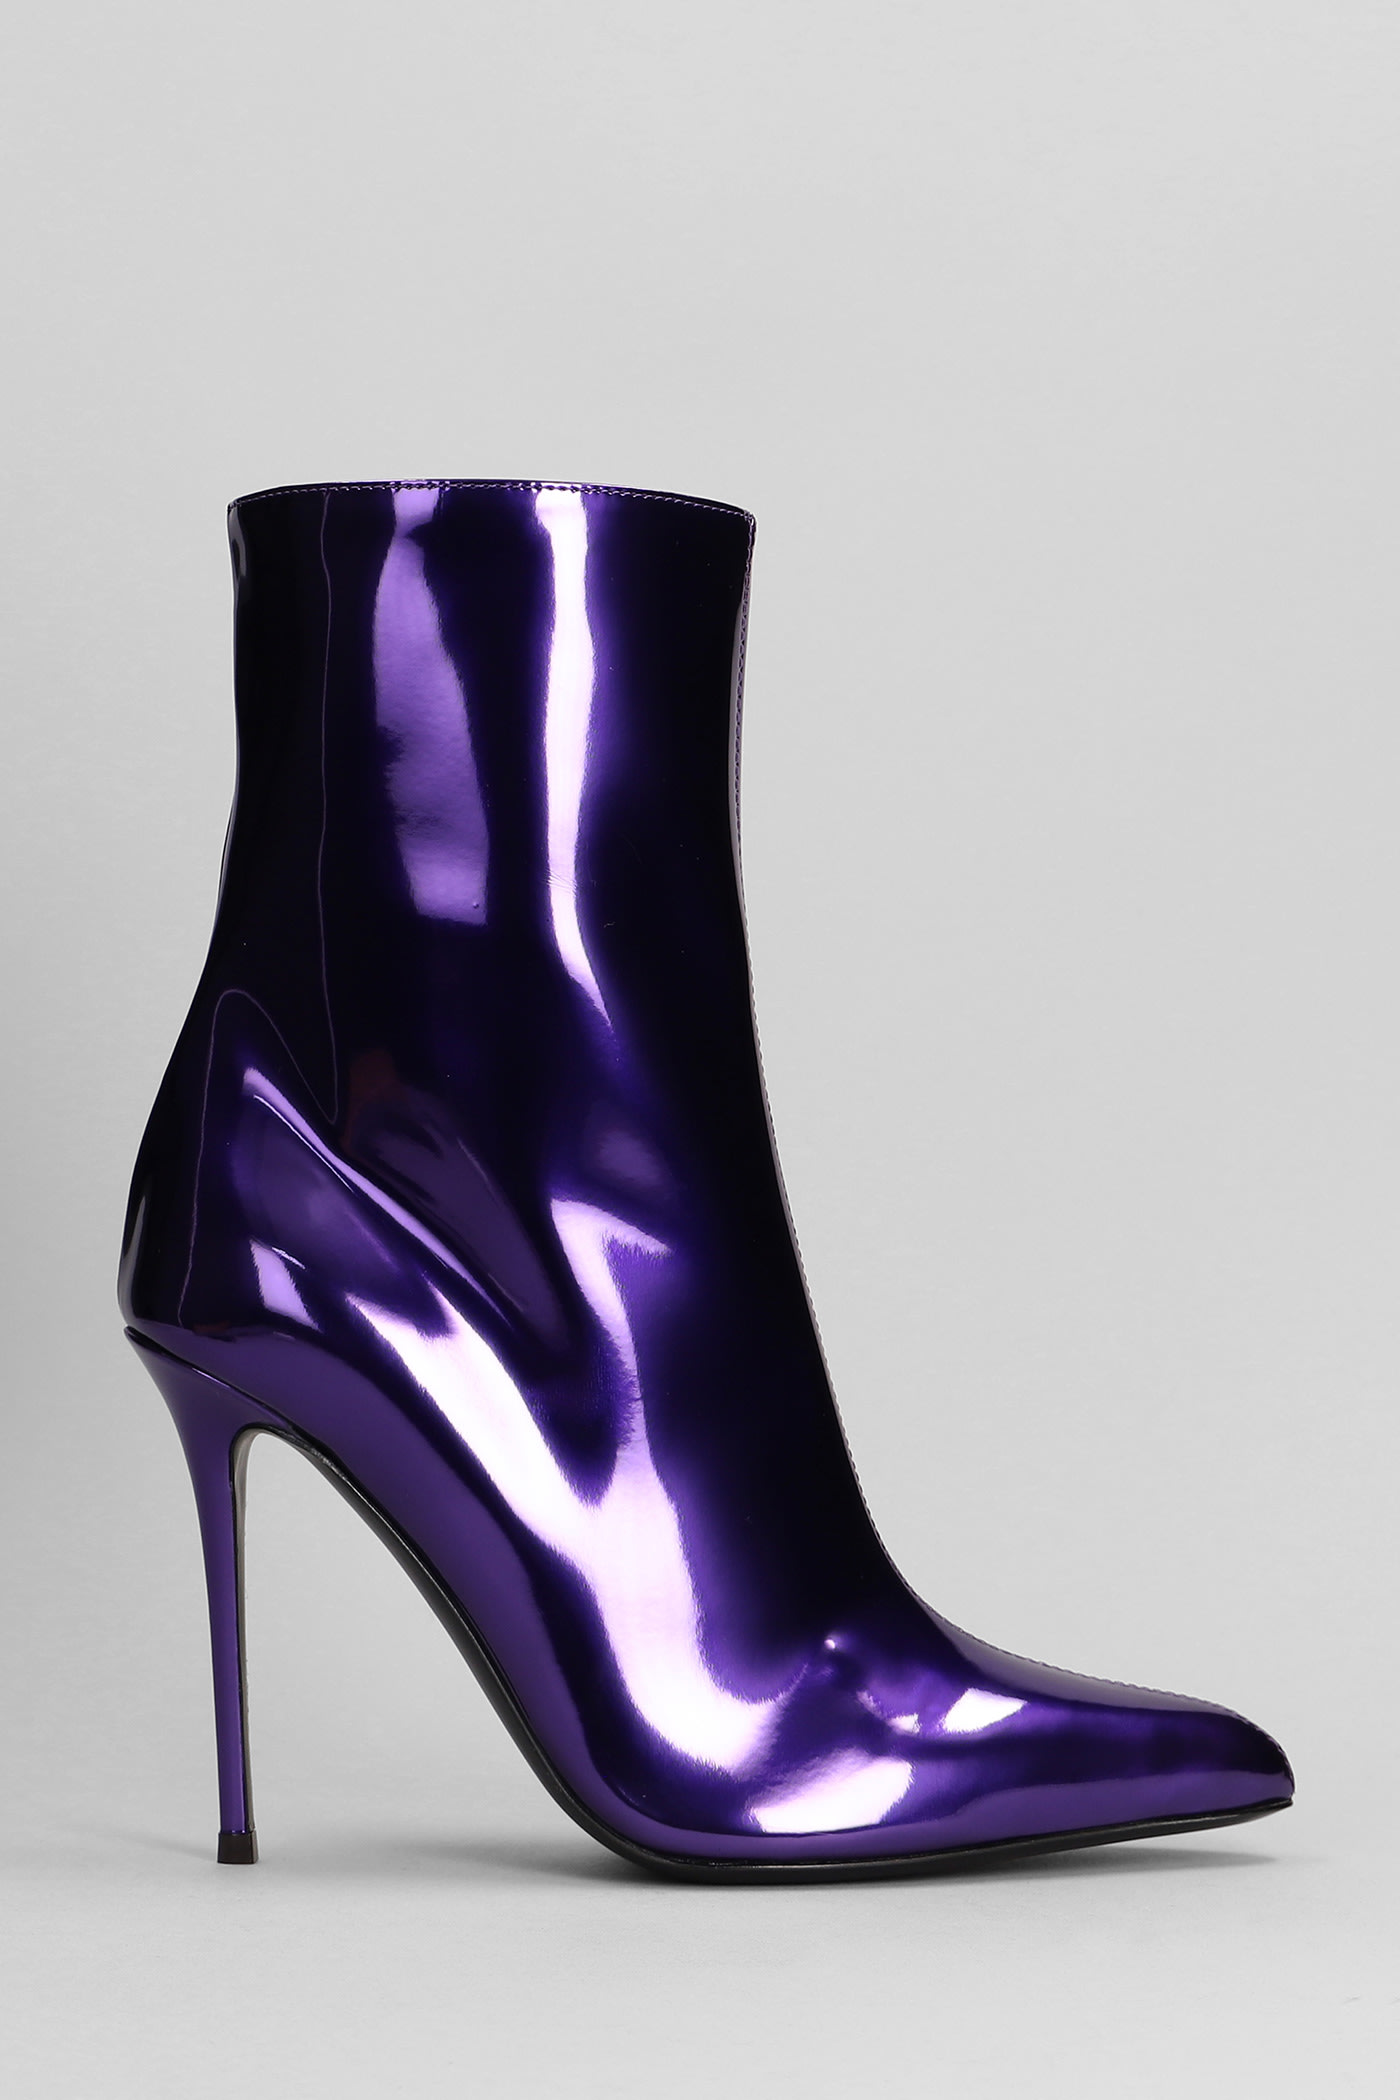 Giuseppe Zanotti Brytta High Heels Ankle Boots In Viola Patent Leather